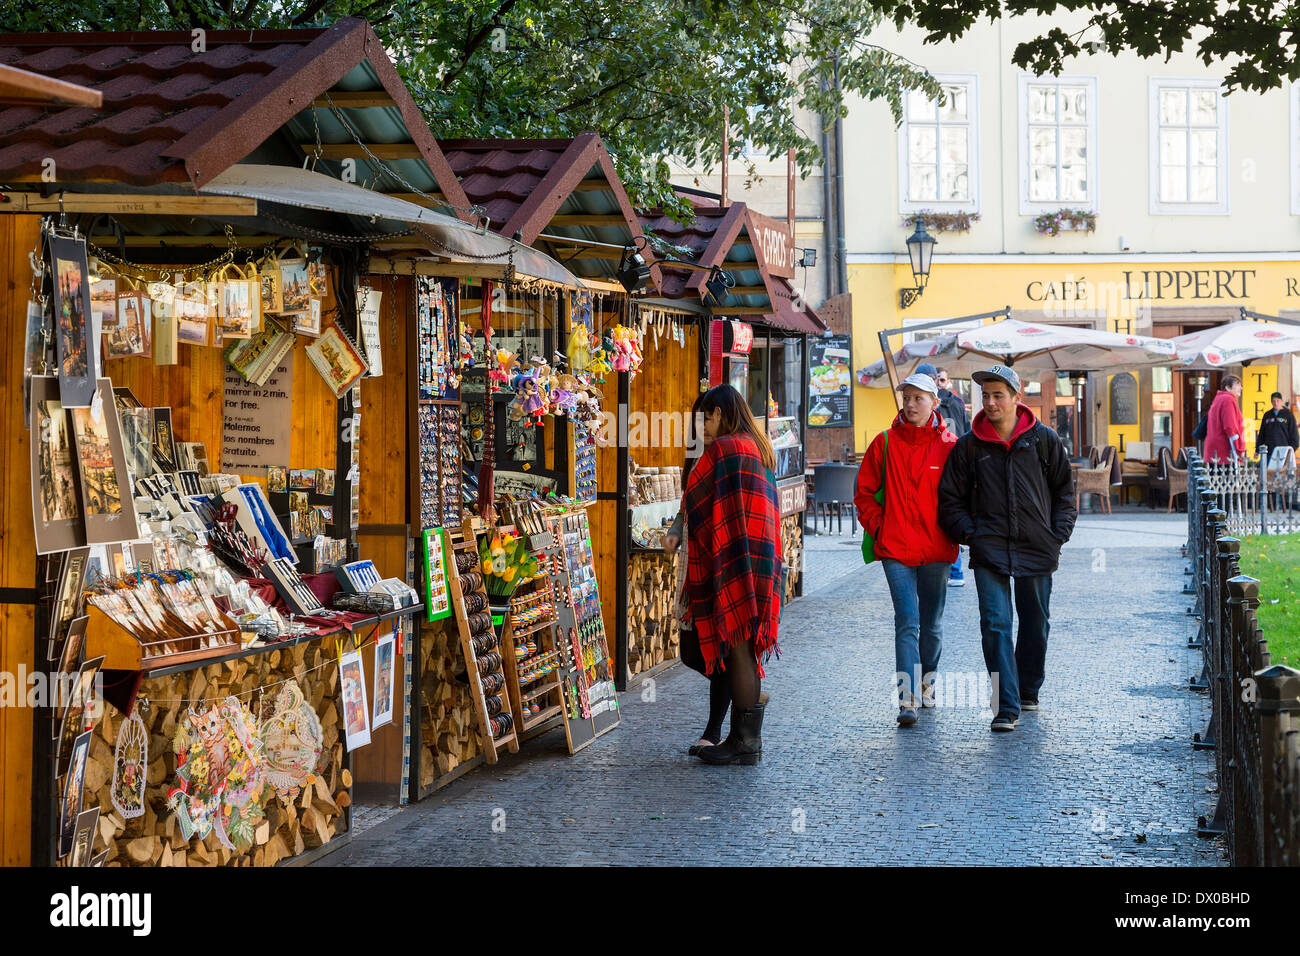 Prague, Market in the Old Town Stock Photo: 67621273 - Alamy